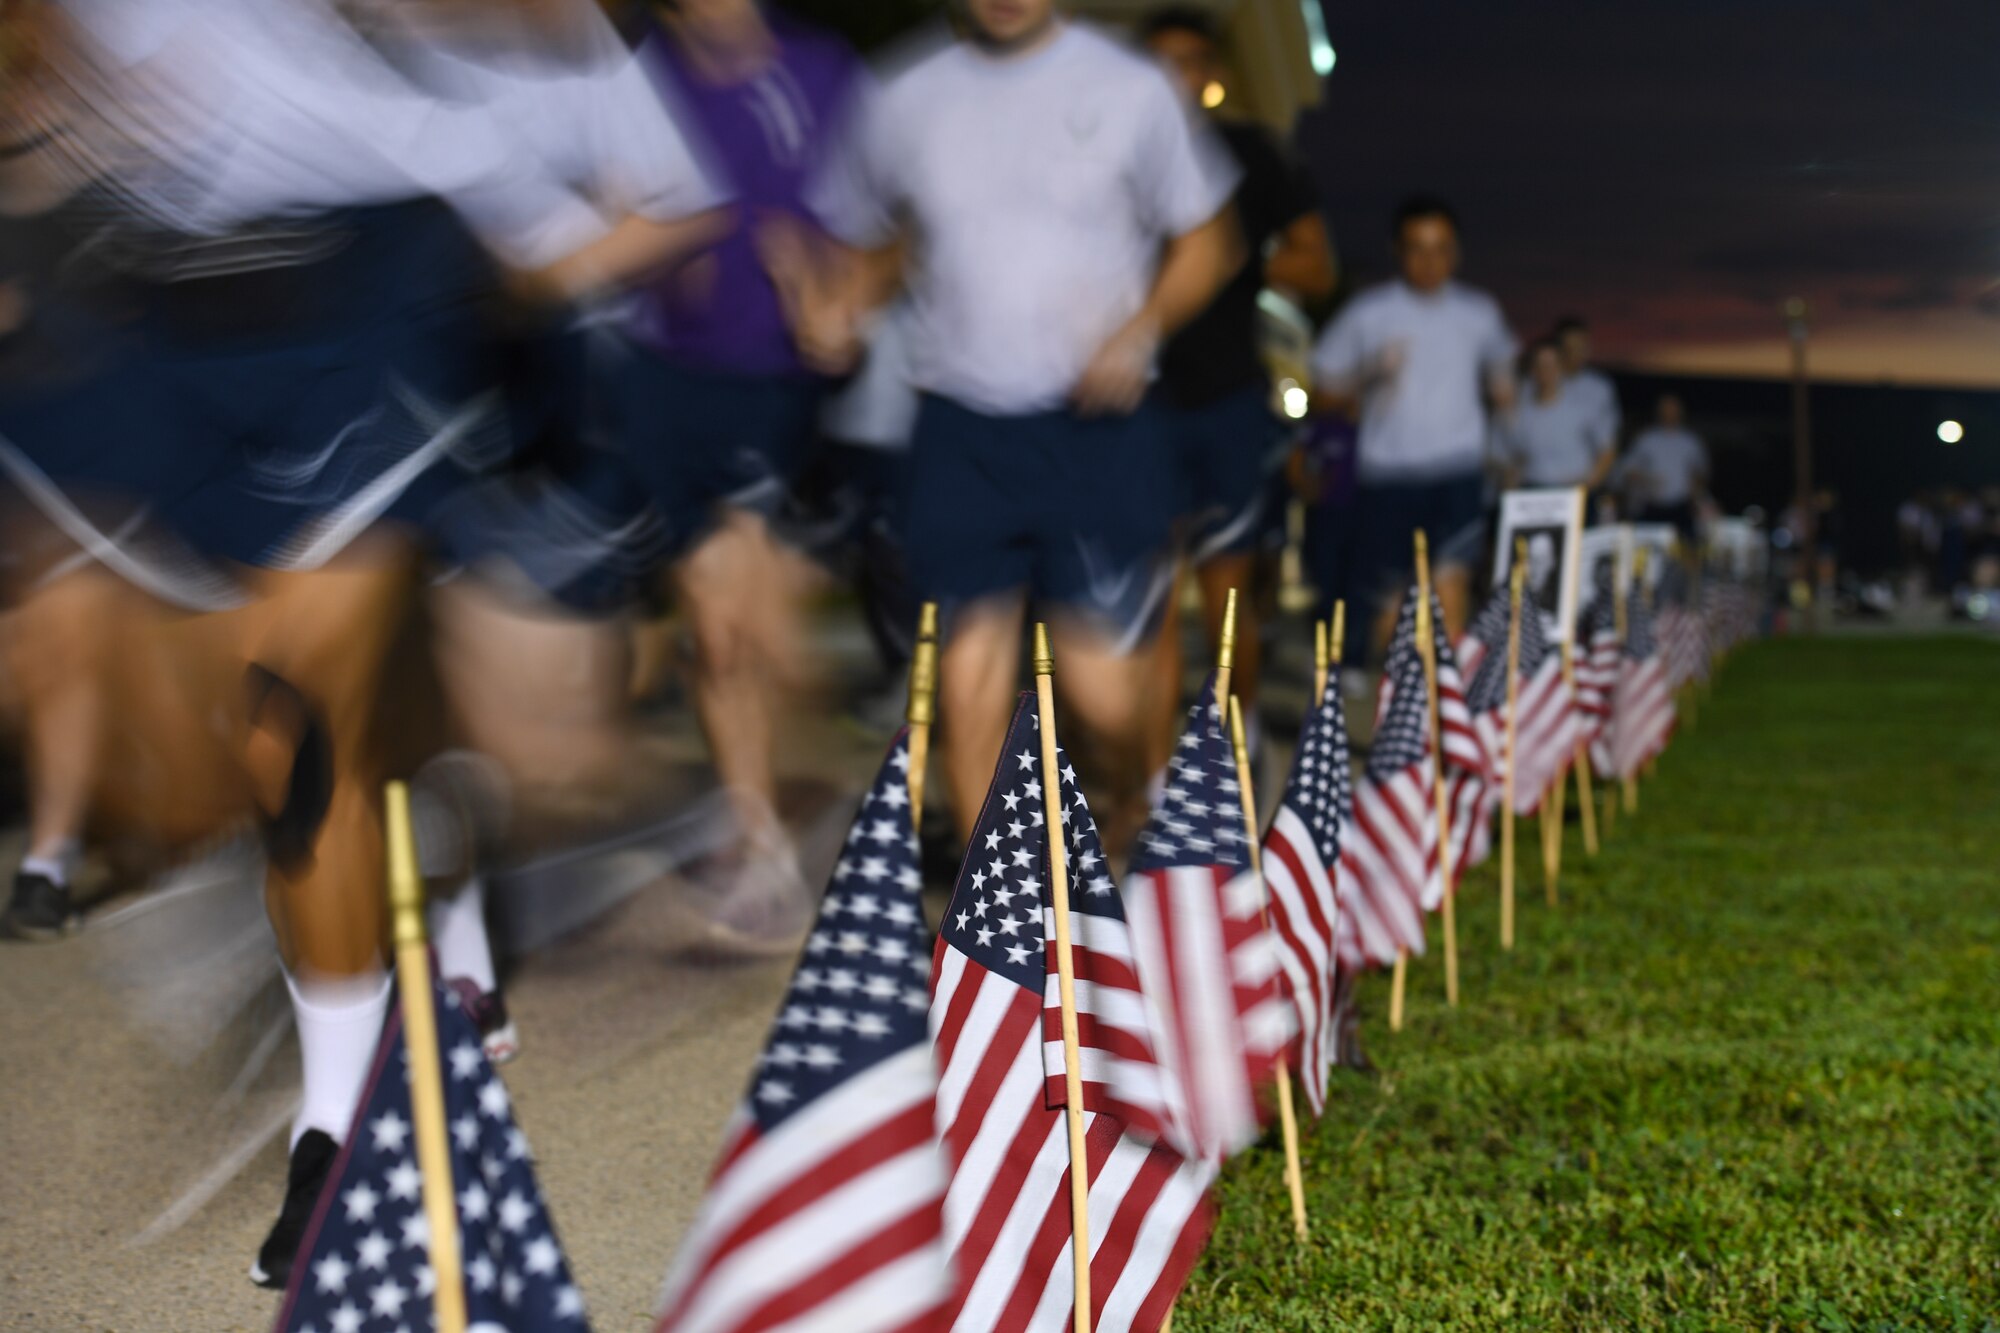 Keesler personnel participate in the POW/MIA run and vigil at Keesler Air Force Base, Mississippi, Oct. 1, 2021. This event, hosted by the Air Force Sergeants Association Chapter 652, is held annually to raise awareness and pay tribute to all prisoners of war and the military members still missing in action. (U.S. Air Force photo by Kemberly Groue)